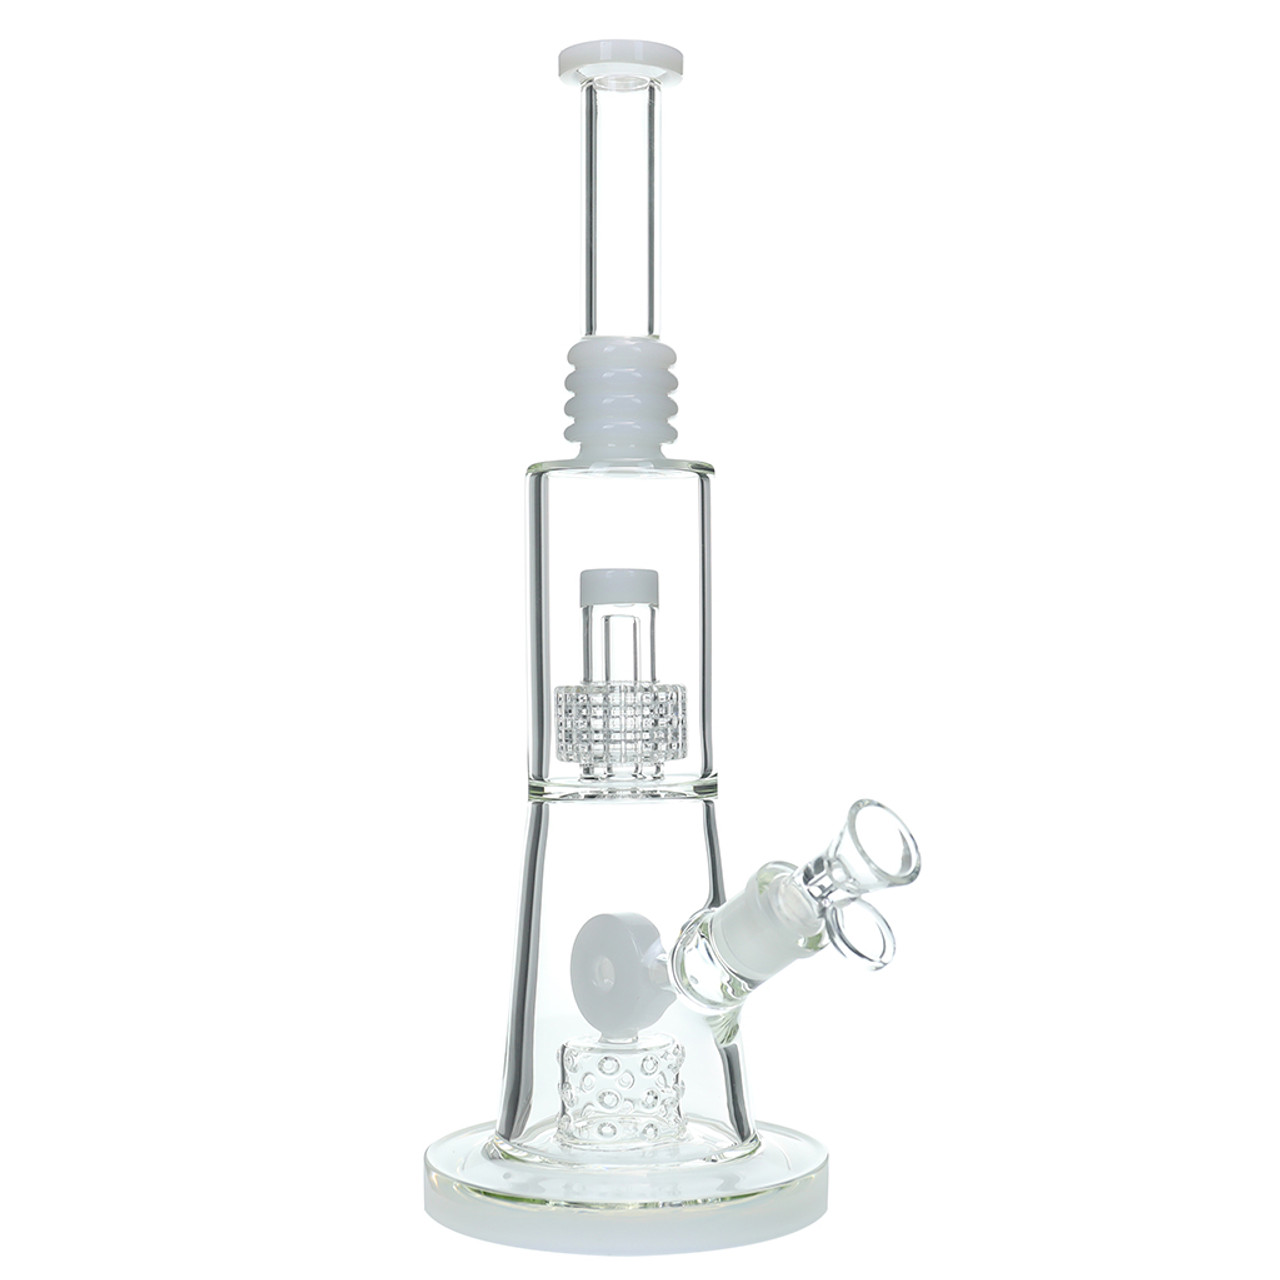 14" Matrix Cube Water Pipe - Assorted Colors